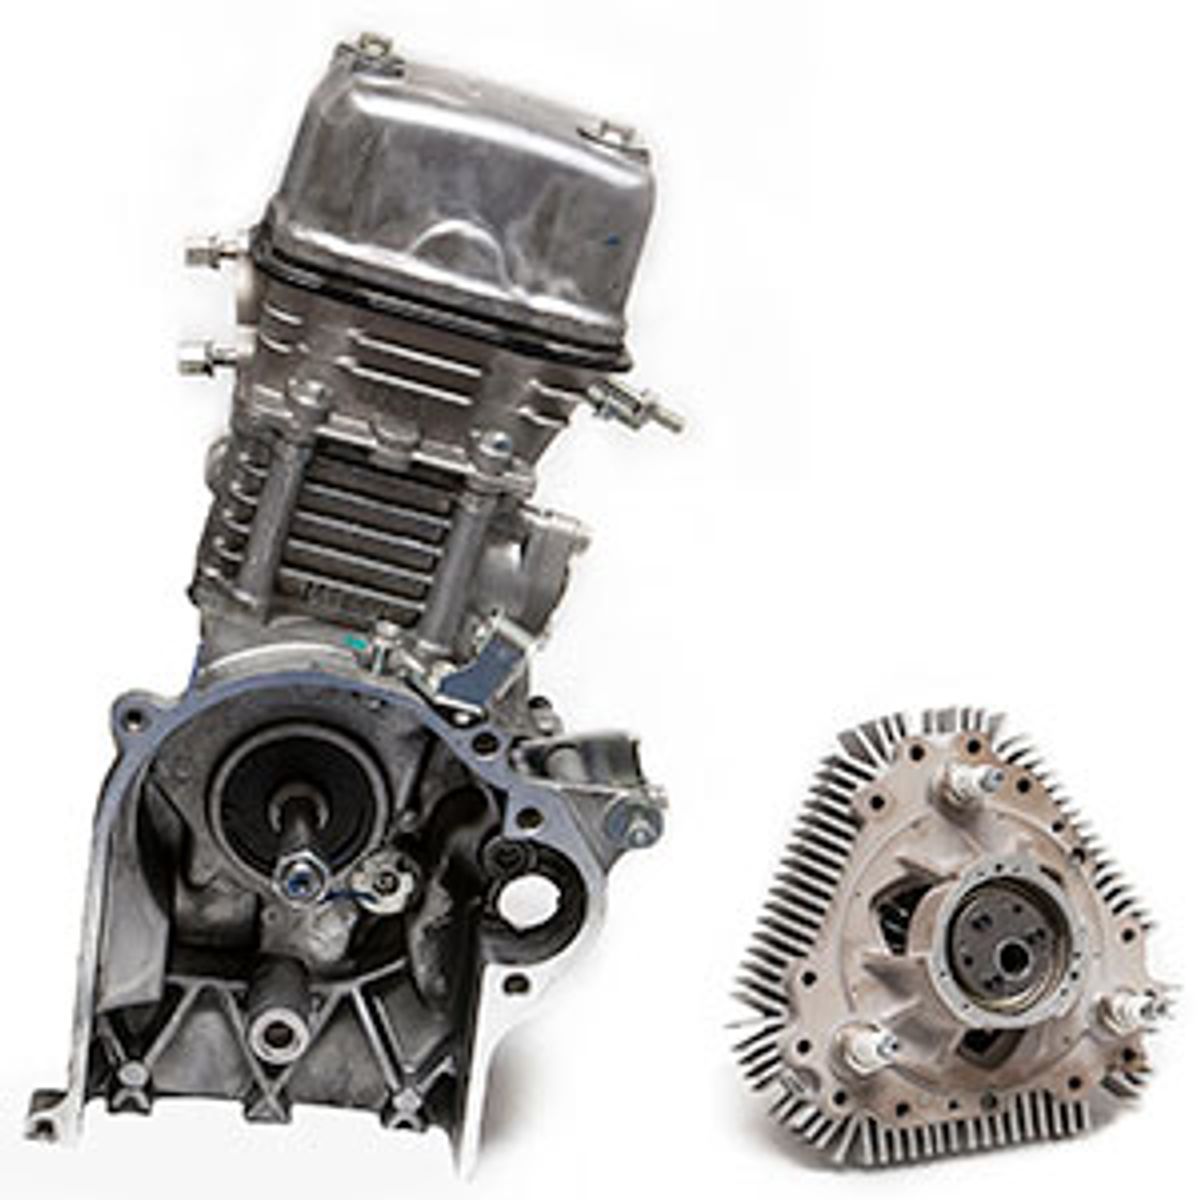 LiquidPiston's rotary engine beside a more conventional internal combustion engine.